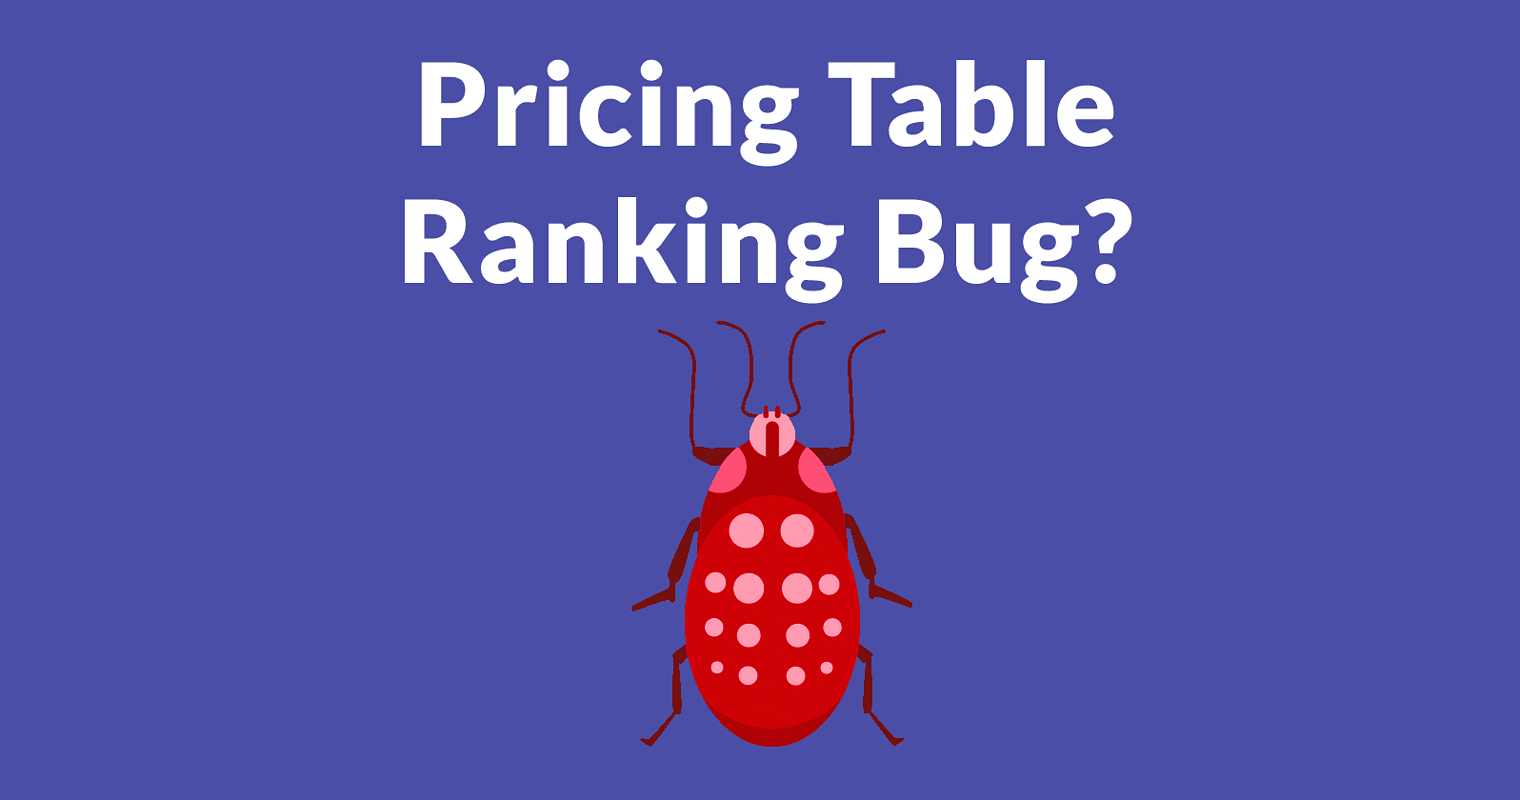 Pricing Lists in Web Pages Hurt Google Rankings?